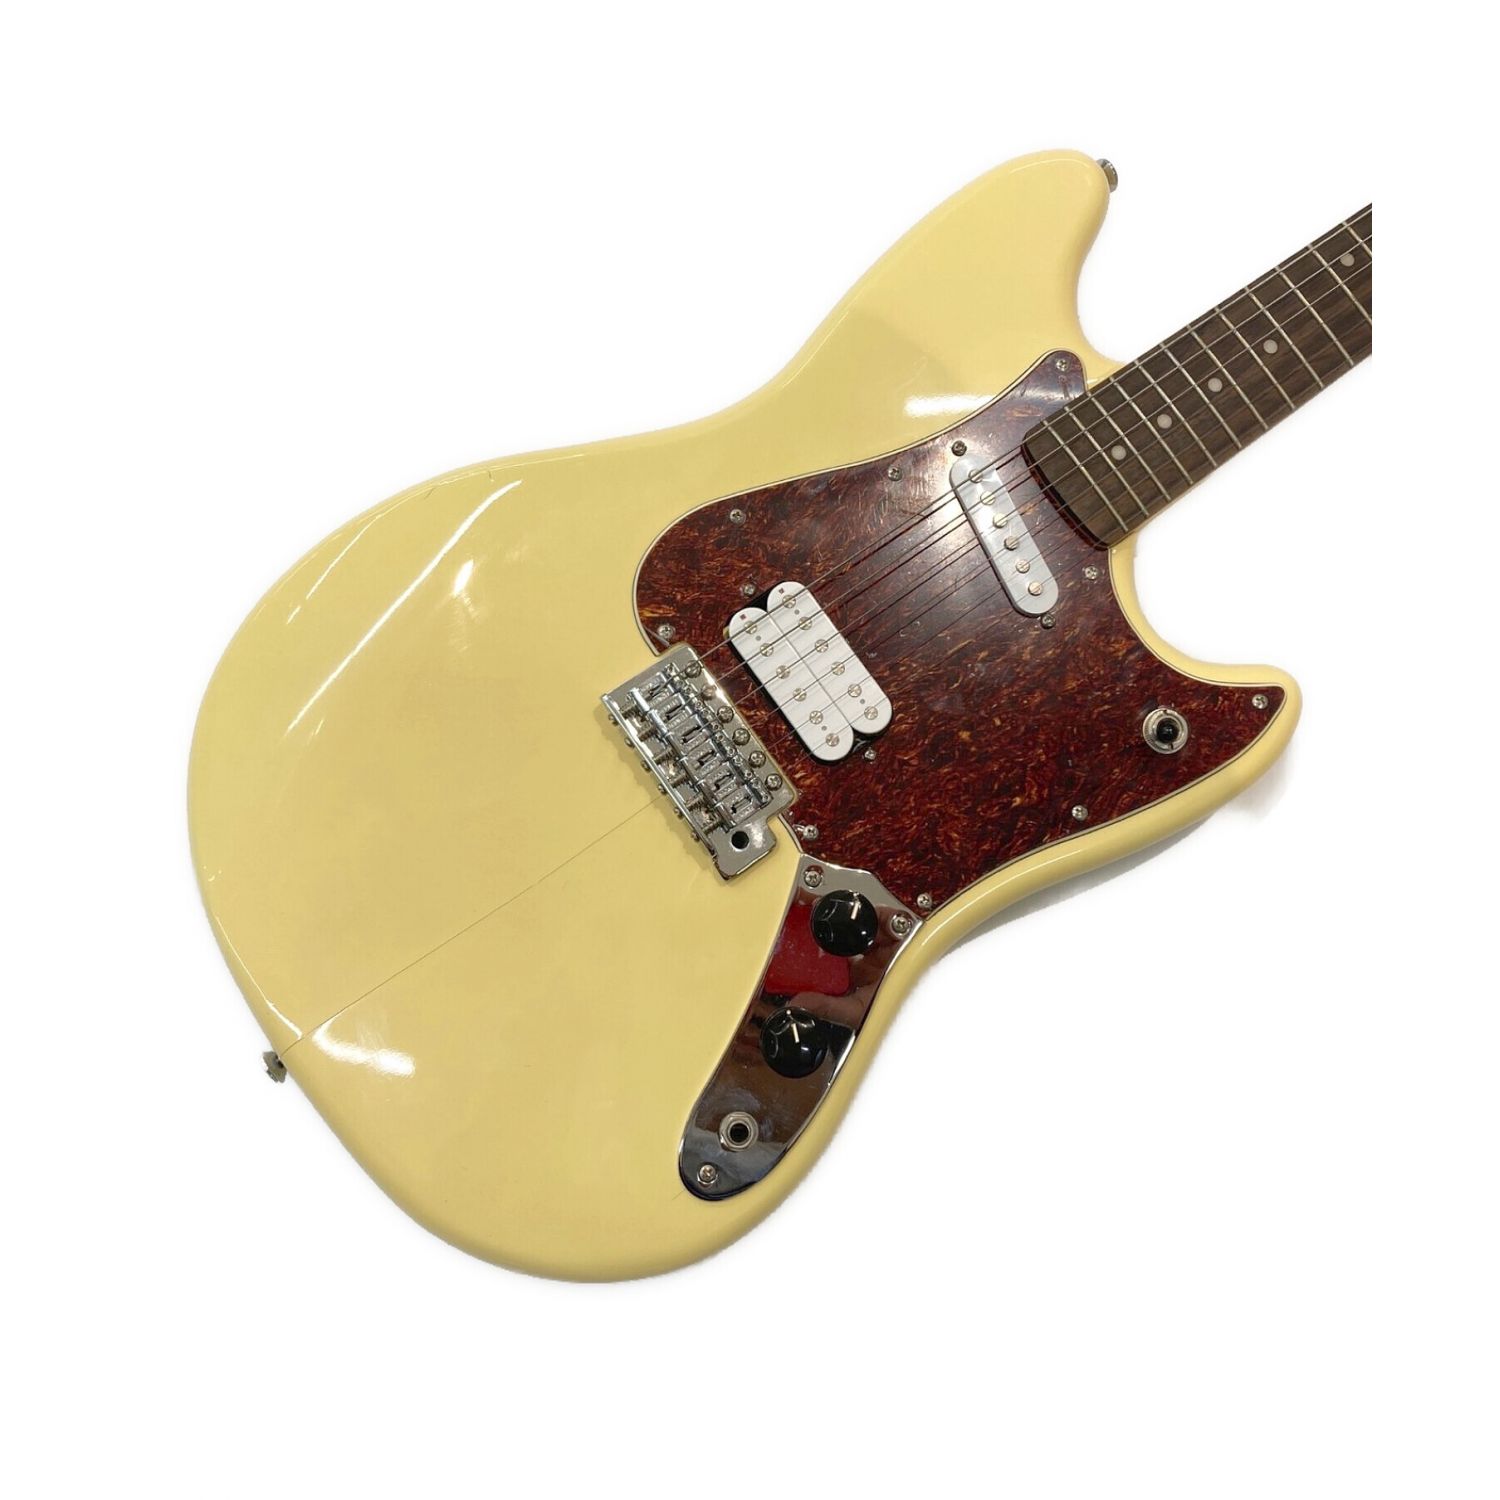 Squier by fender cyclone サイクロン エレキギター